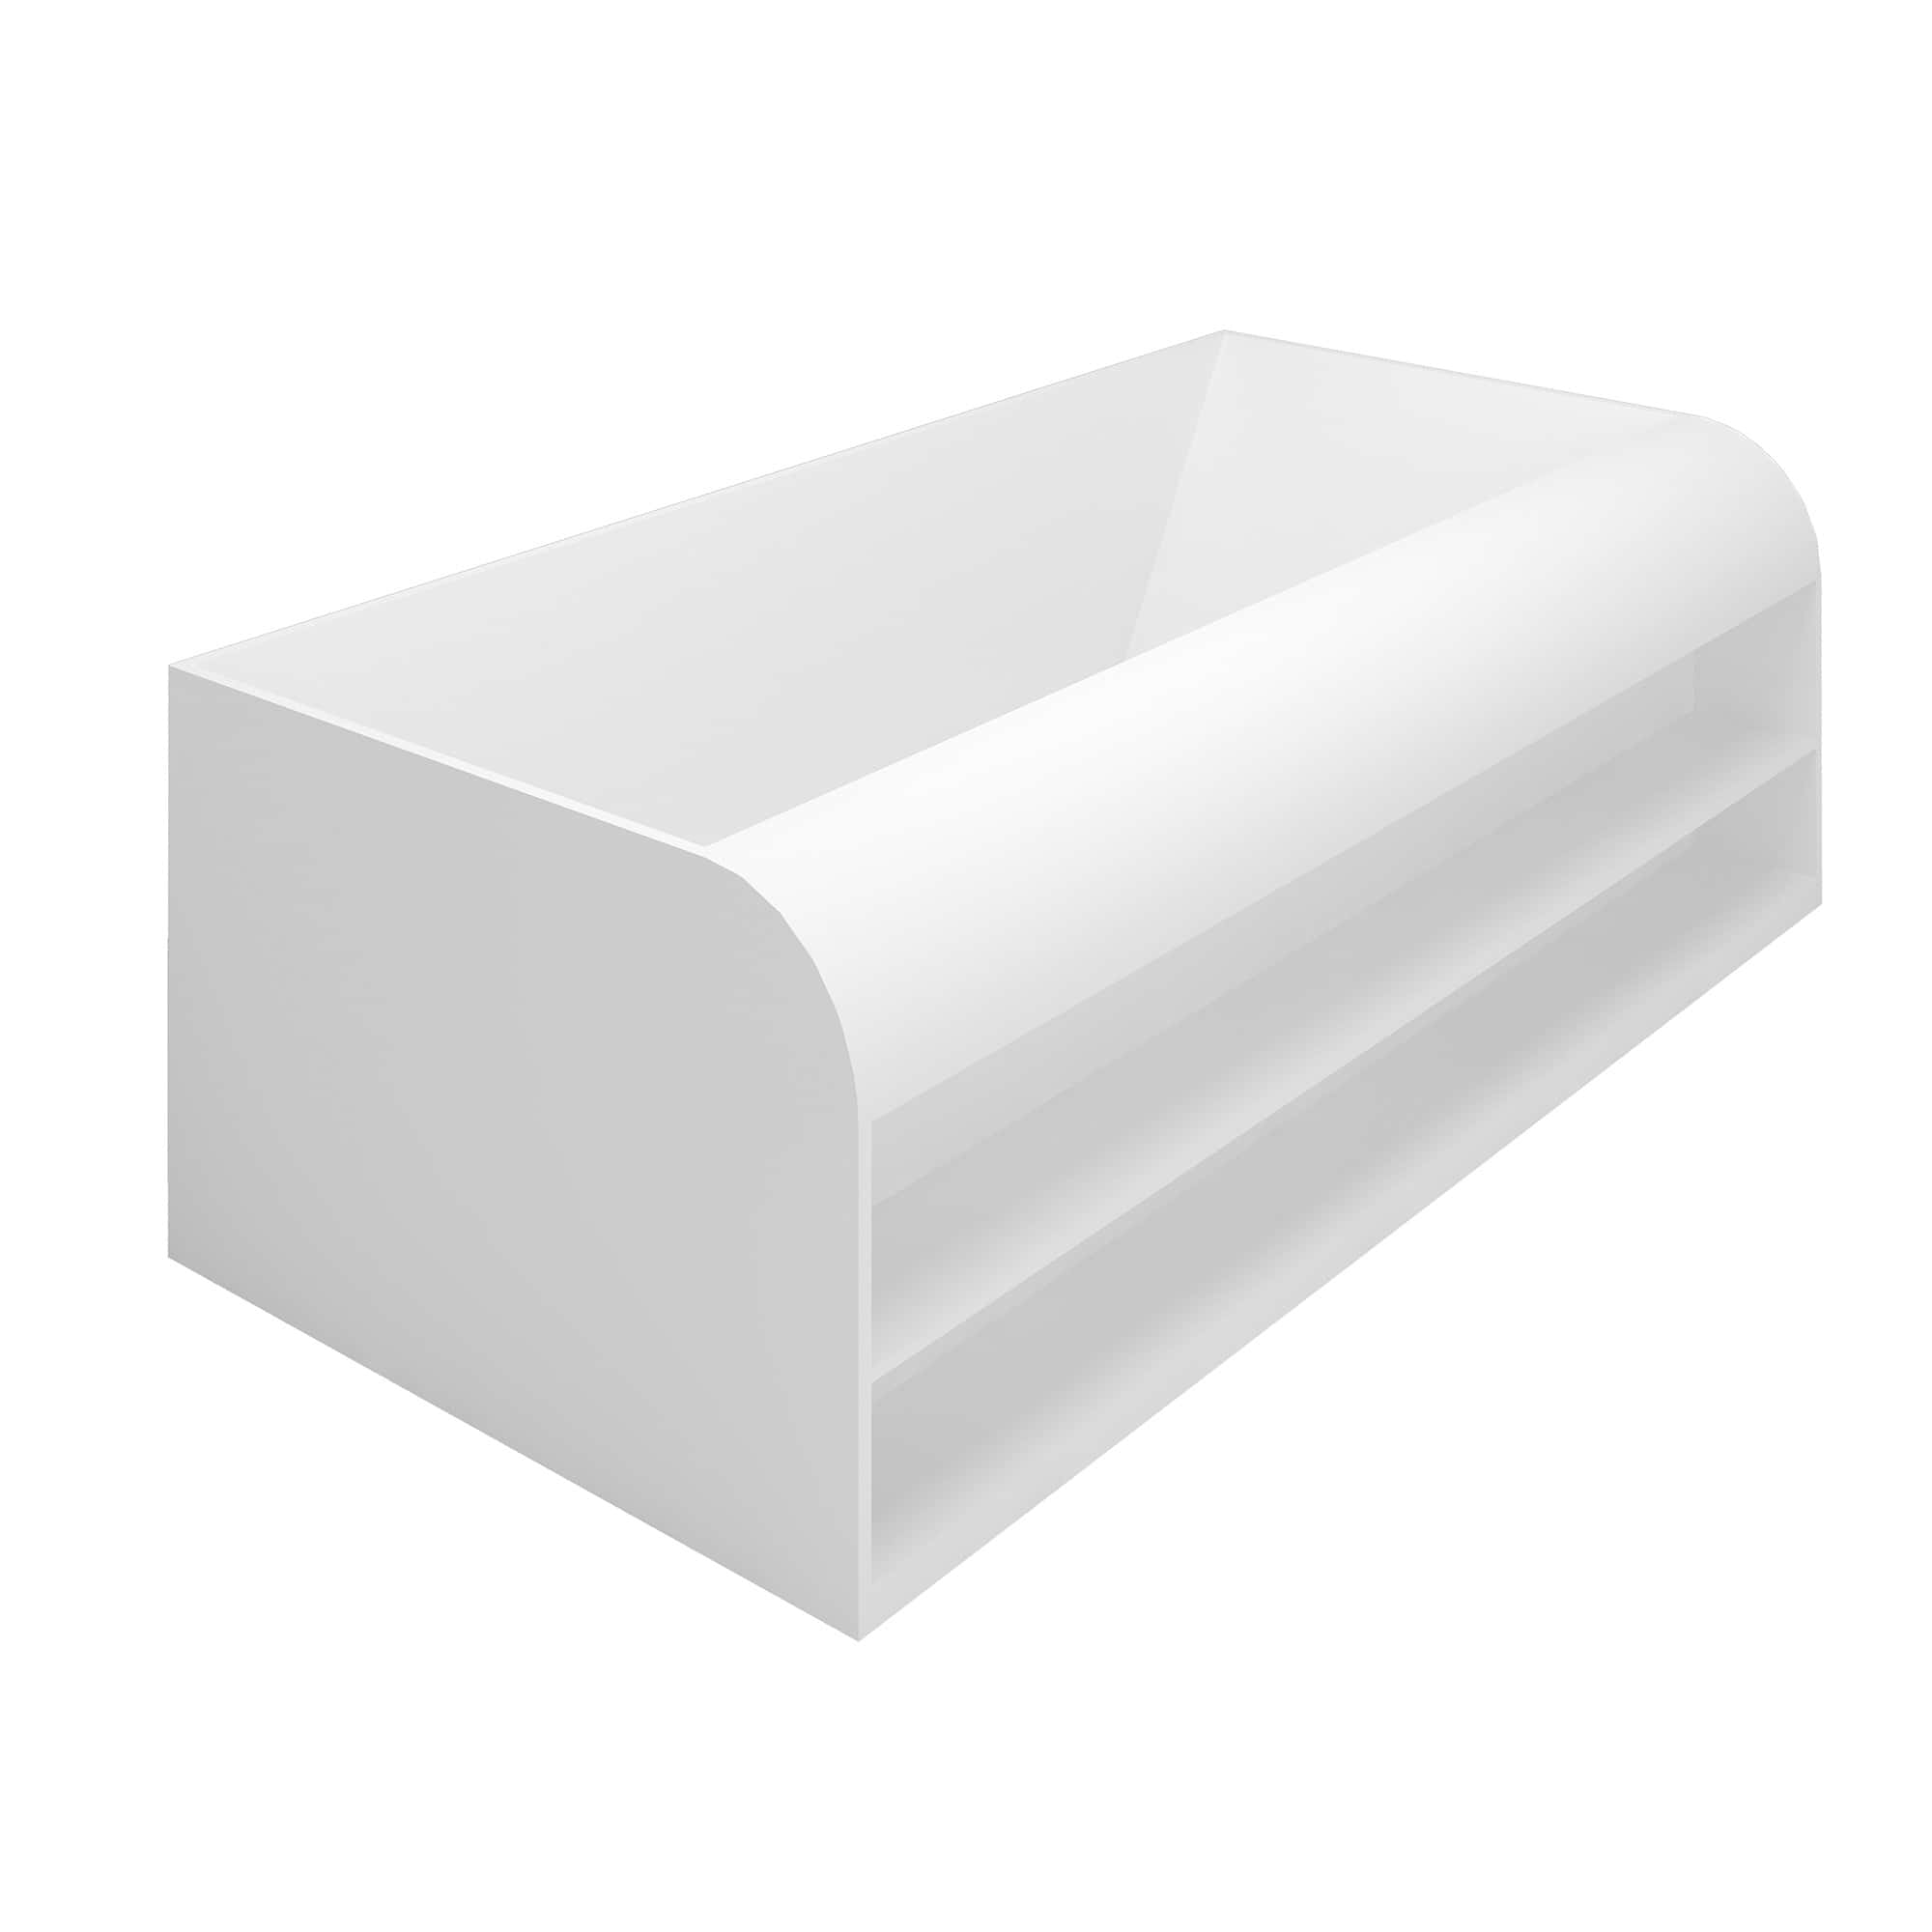 CASAINC 69 Inch Matte White Freestanding Solid Surface Bathtub with Si